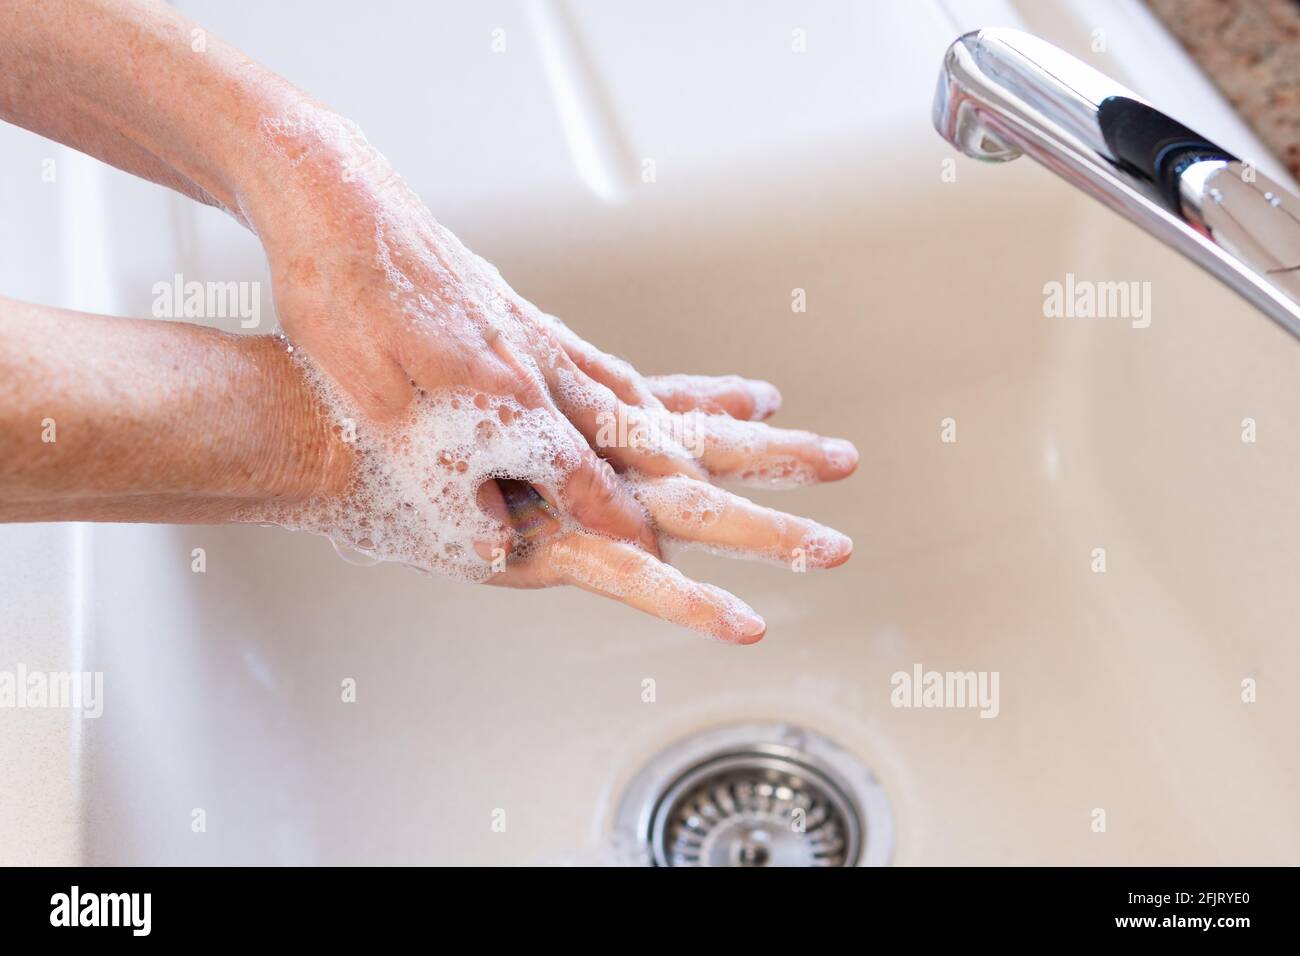 Elderly woman washing her hands with soap in kitchen sink. Fingers spread. Concept of personal hygiene for corona virus (covid-19) infection protection. Stock Photo